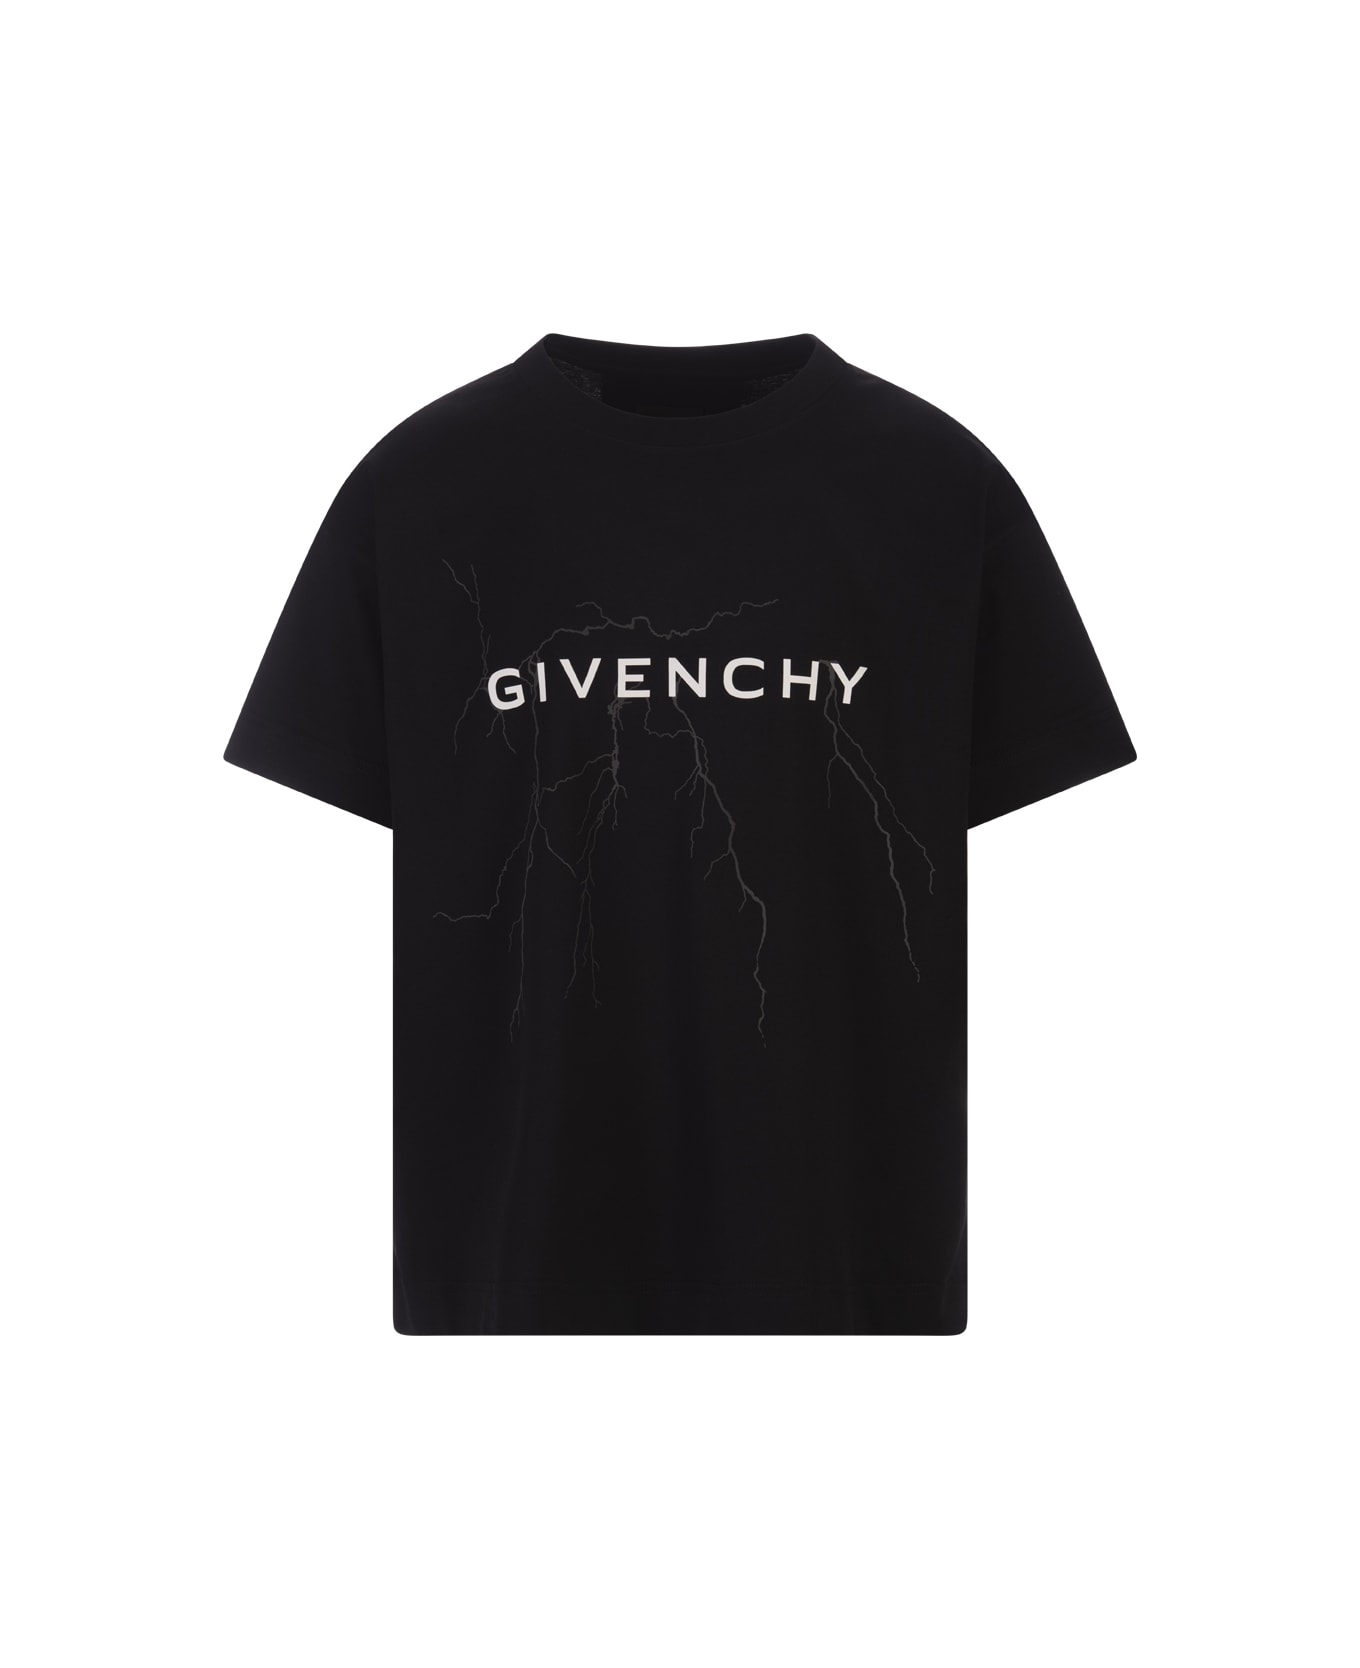 Givenchy Loose T-shirt In Black Cotton With Reflective Pattern - Black